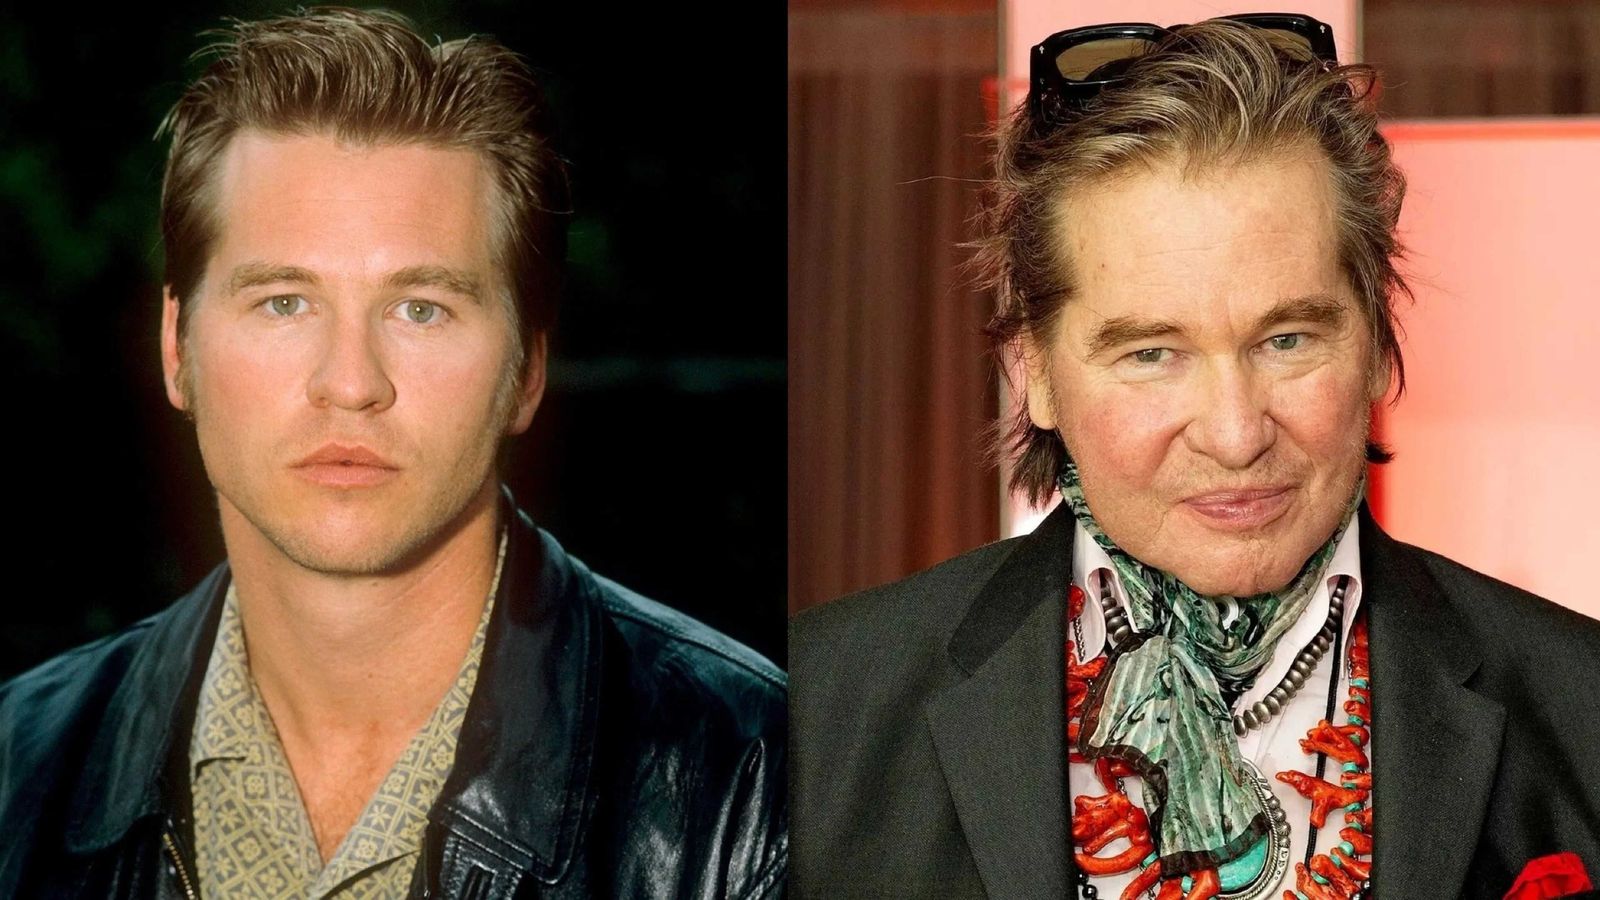 Val Kilmer unveils life on and off screen: 'Selling His Past' to survive